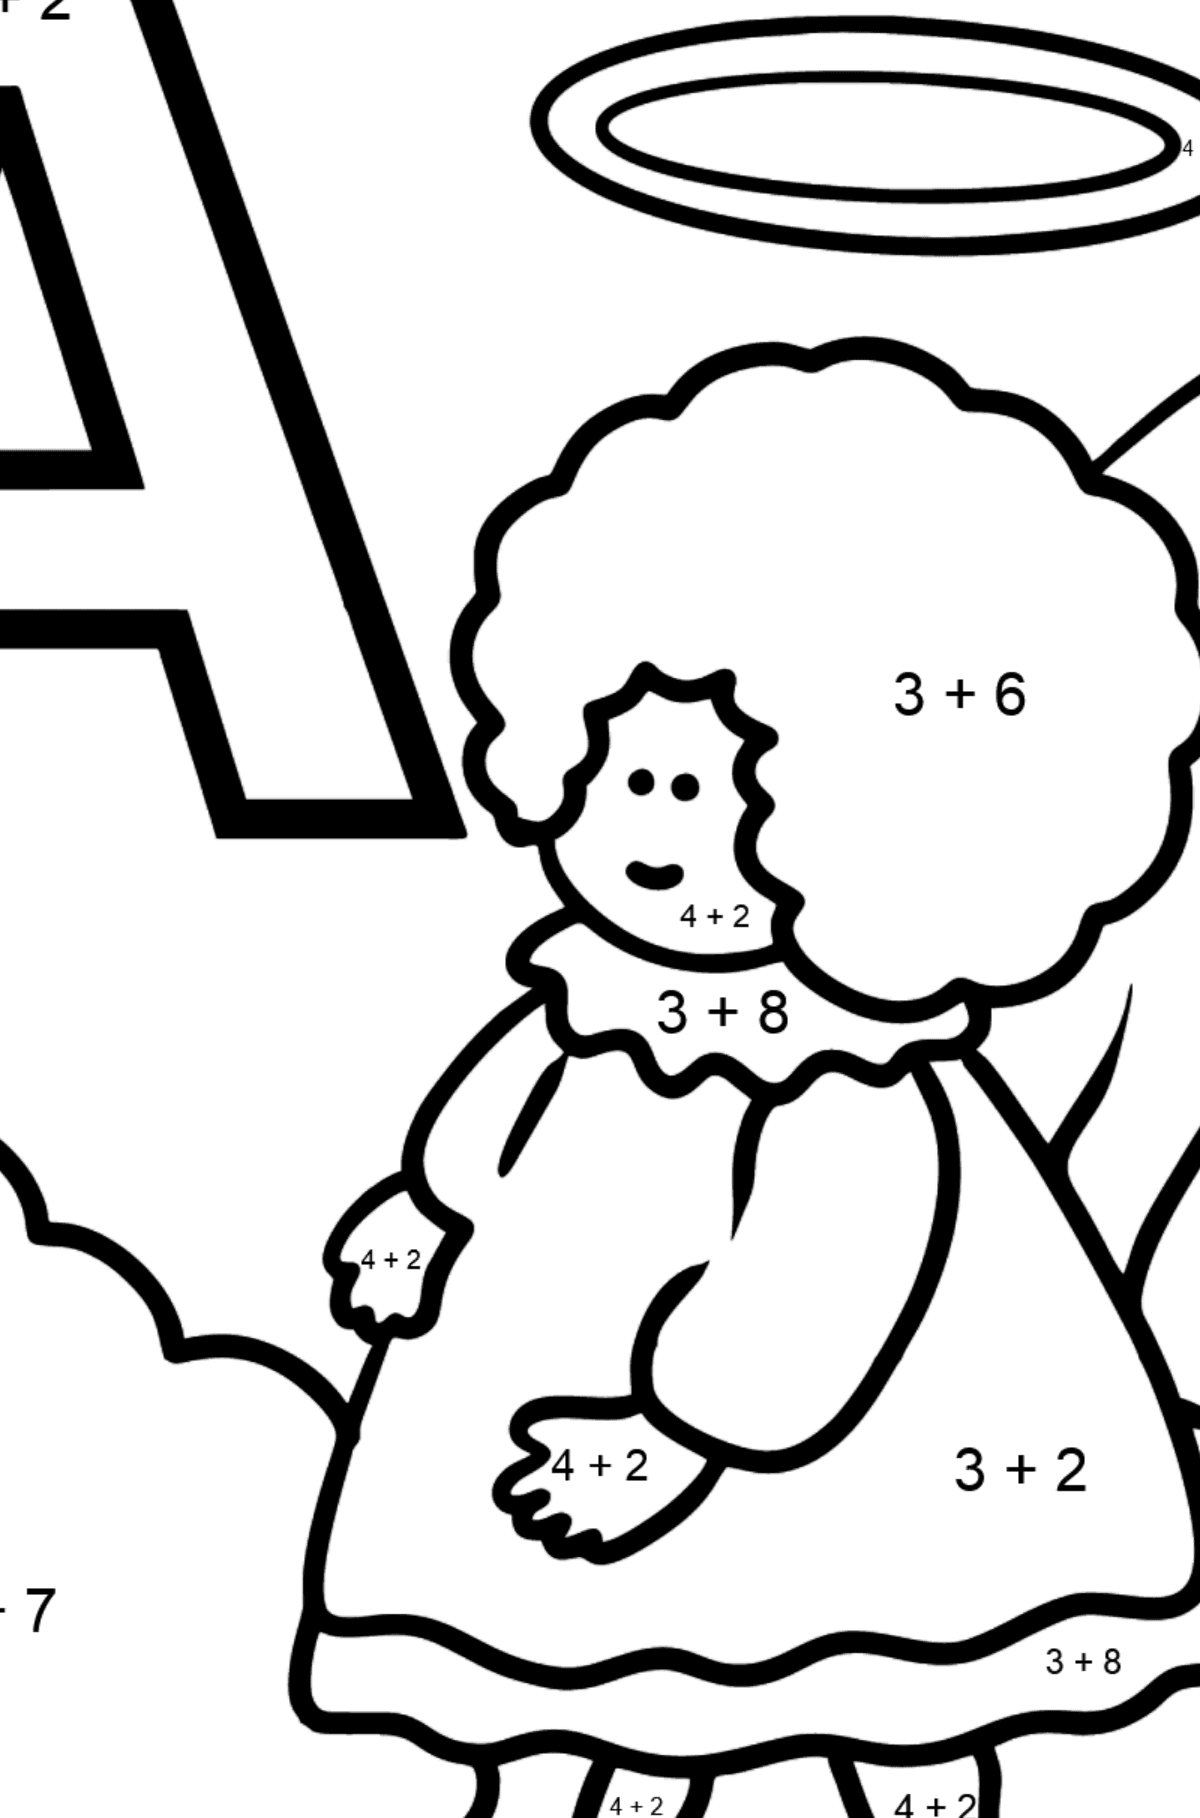 Spanish Letter A coloring pages - ÁNGEL - Math Coloring - Addition for Kids